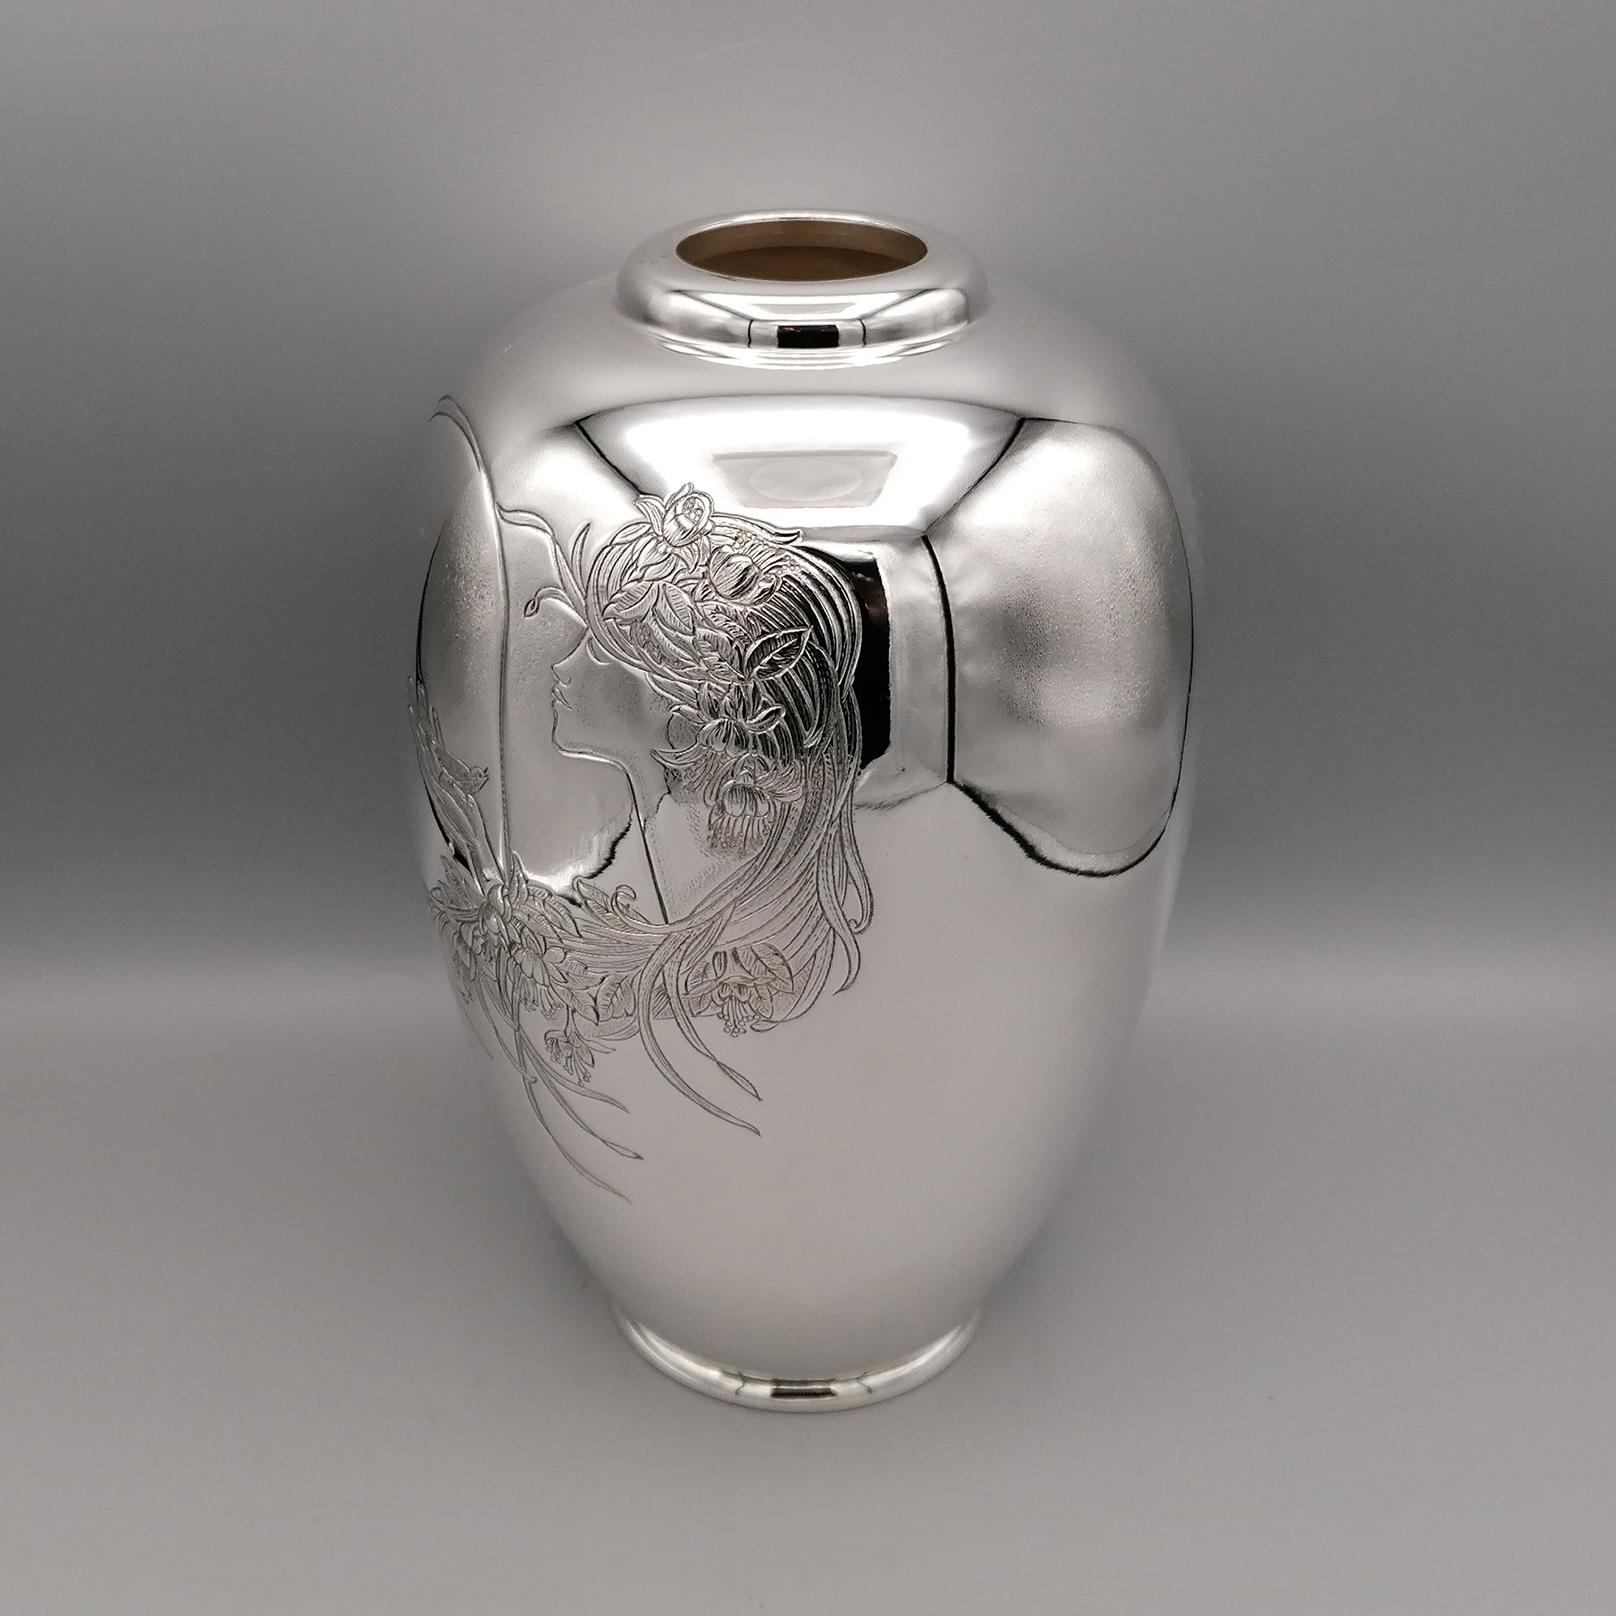 Vase in 800 solid silver.
The shape of the vase is round, pot-bellied and has been made with a smooth and glossy finish.
The vason was embellished with a hand engraving depicting an oriental woman with long hair decorated with flowers.
The female